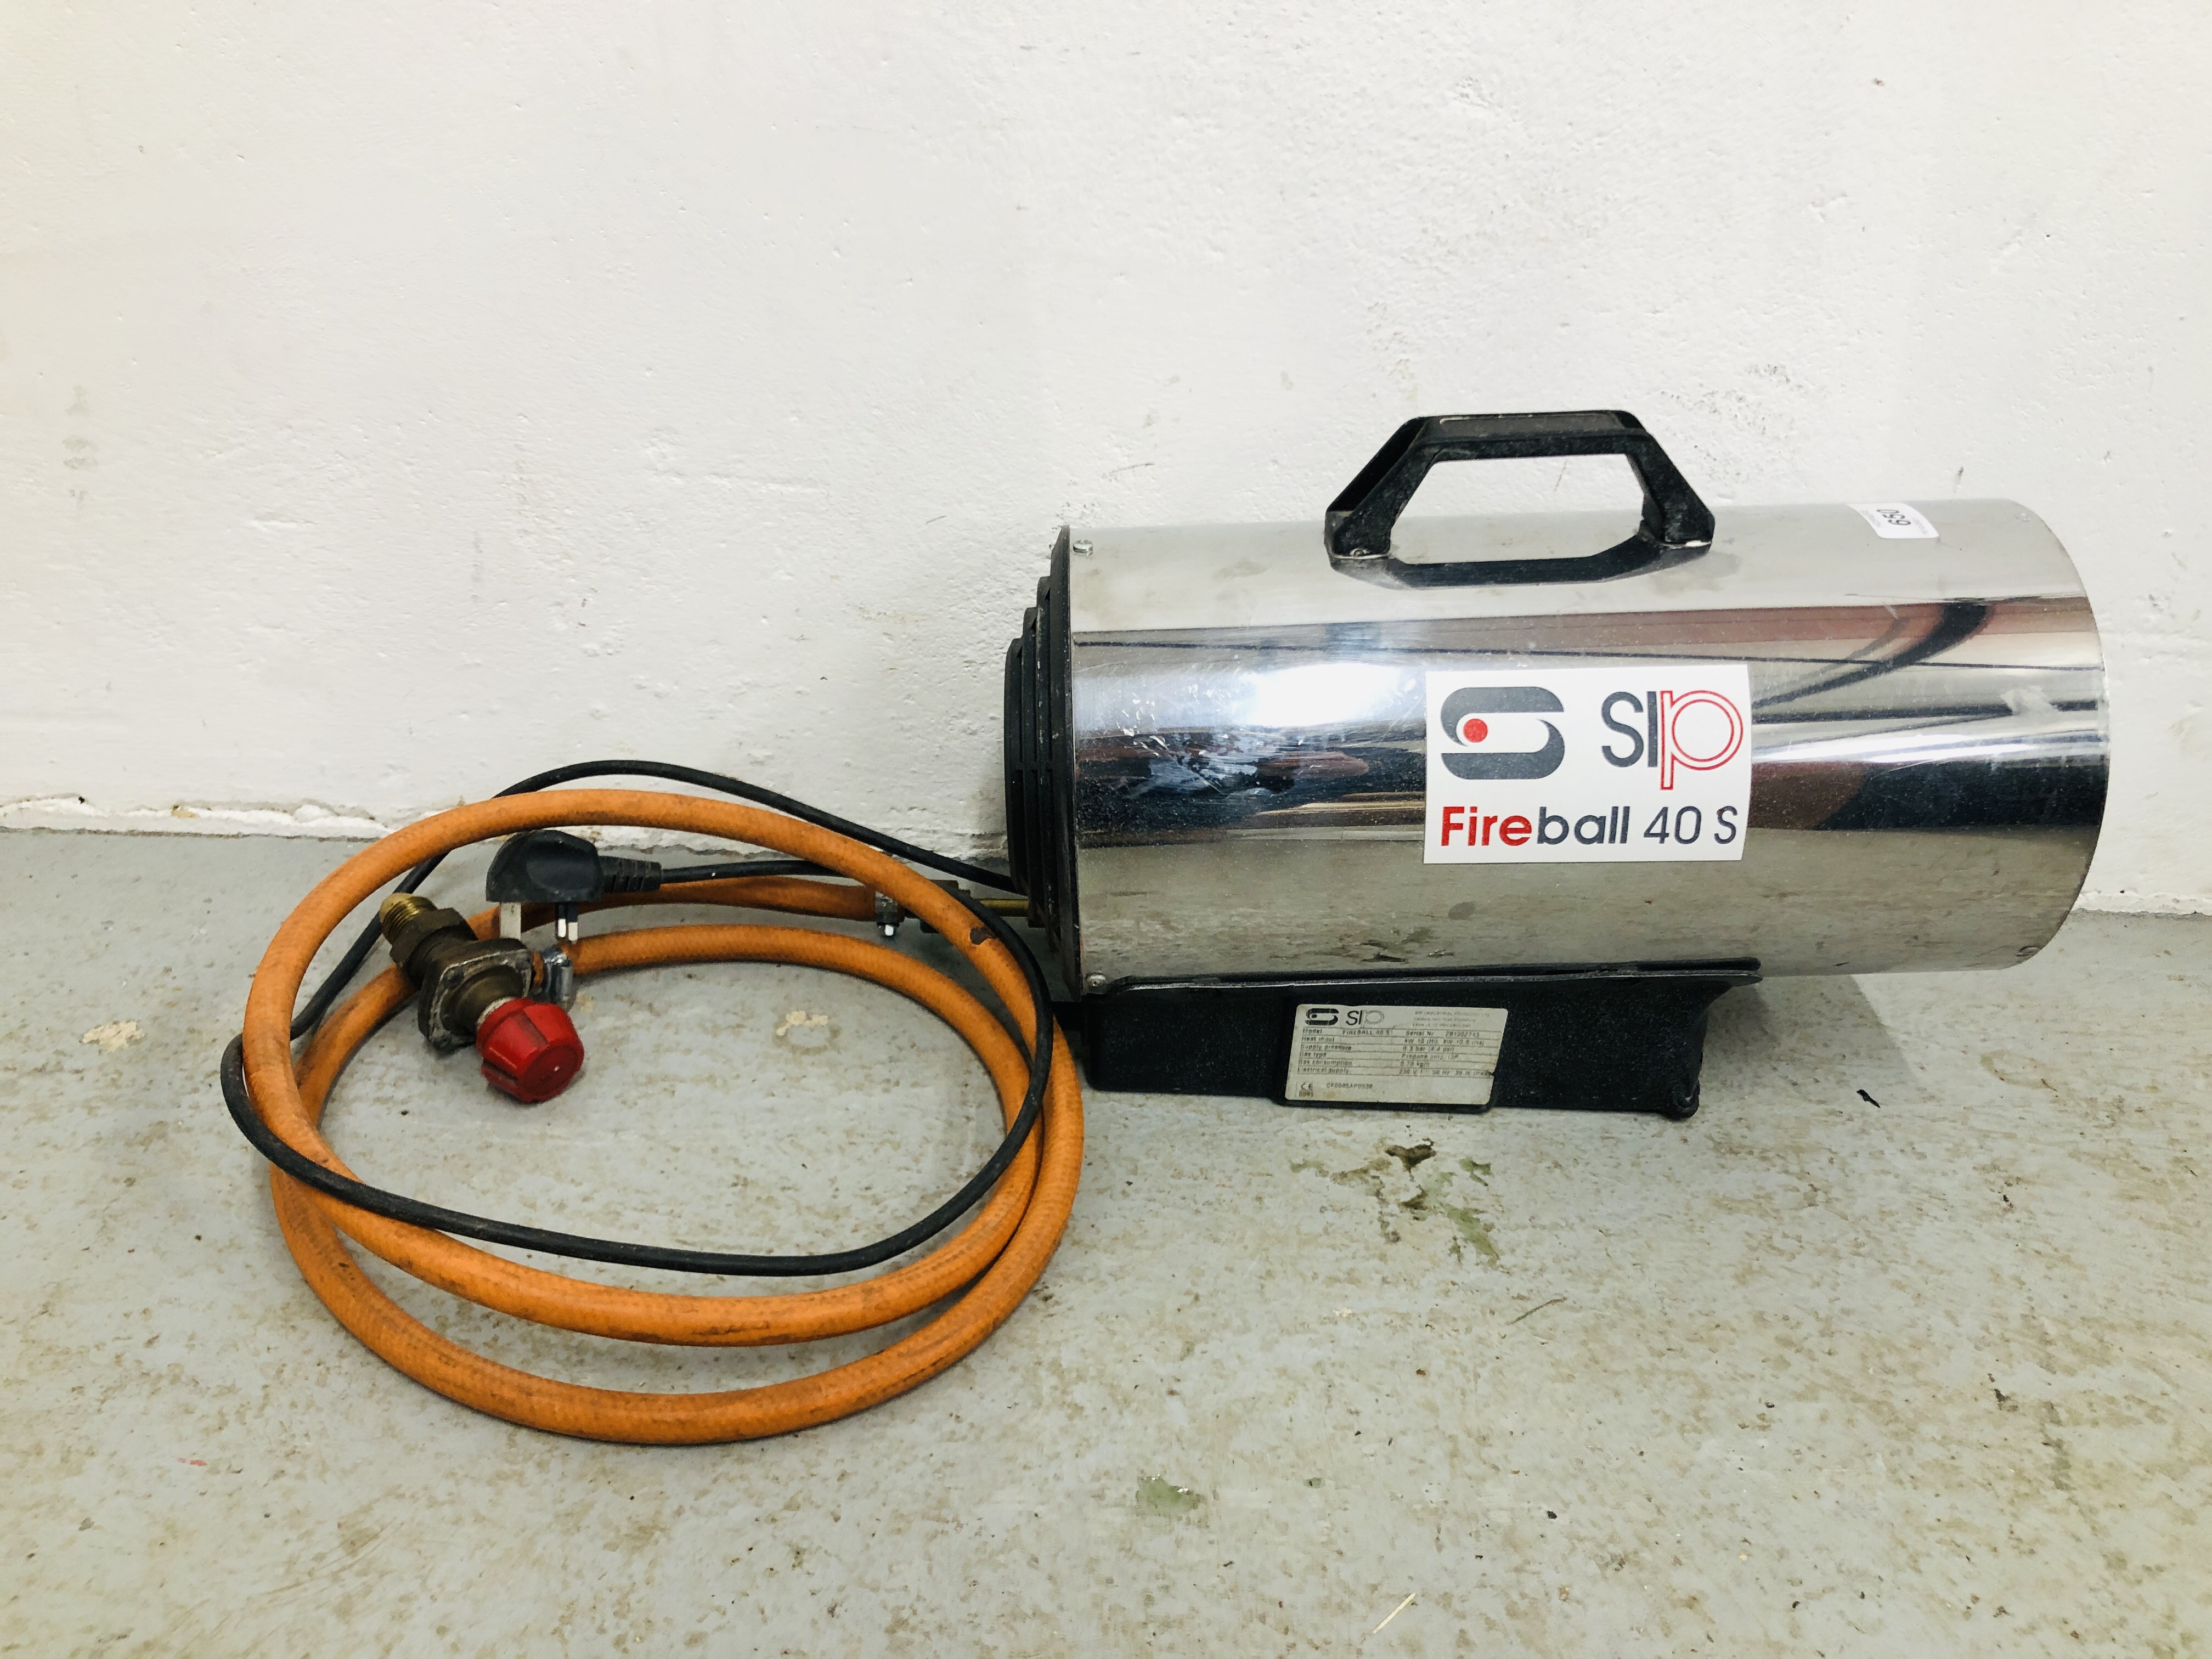 A FIREBALL 40 S PROPANE BLOWER HEATER WITH ELECTRIC IGNITION - SOLD AS SEEN